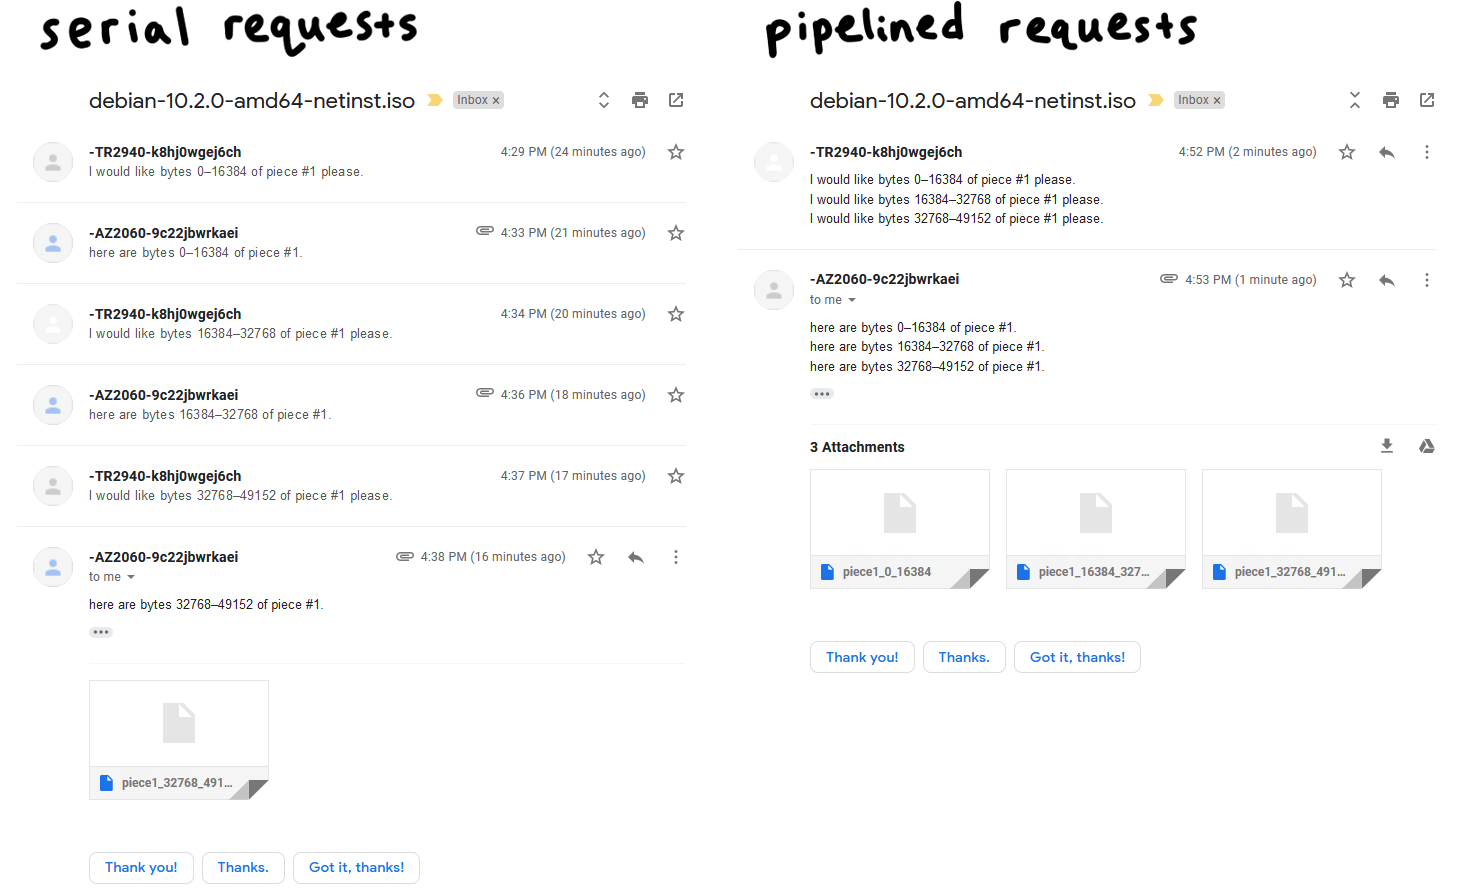 Two email threads simulating peer connections. The thread on the left shows a request followed by a reply, repeated three times. The thread on the left sends three requests, and receives three replies in quick succession.